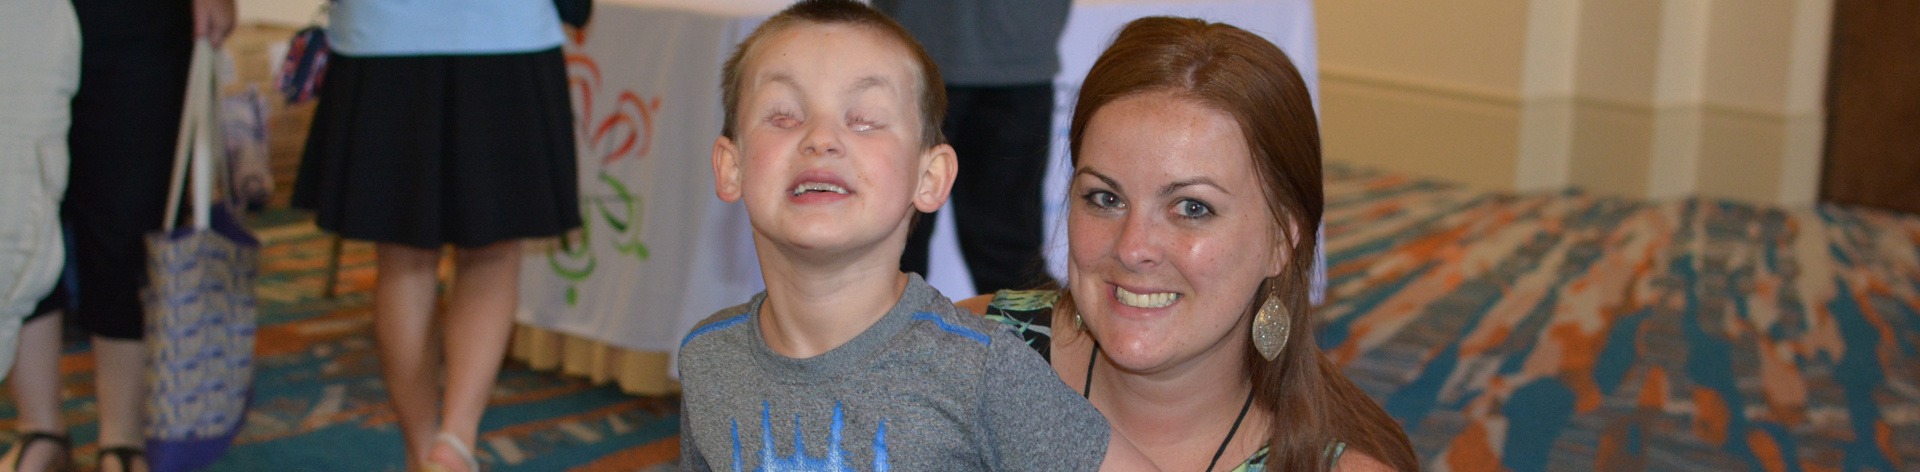 A mother smiles with her blind son at convention.